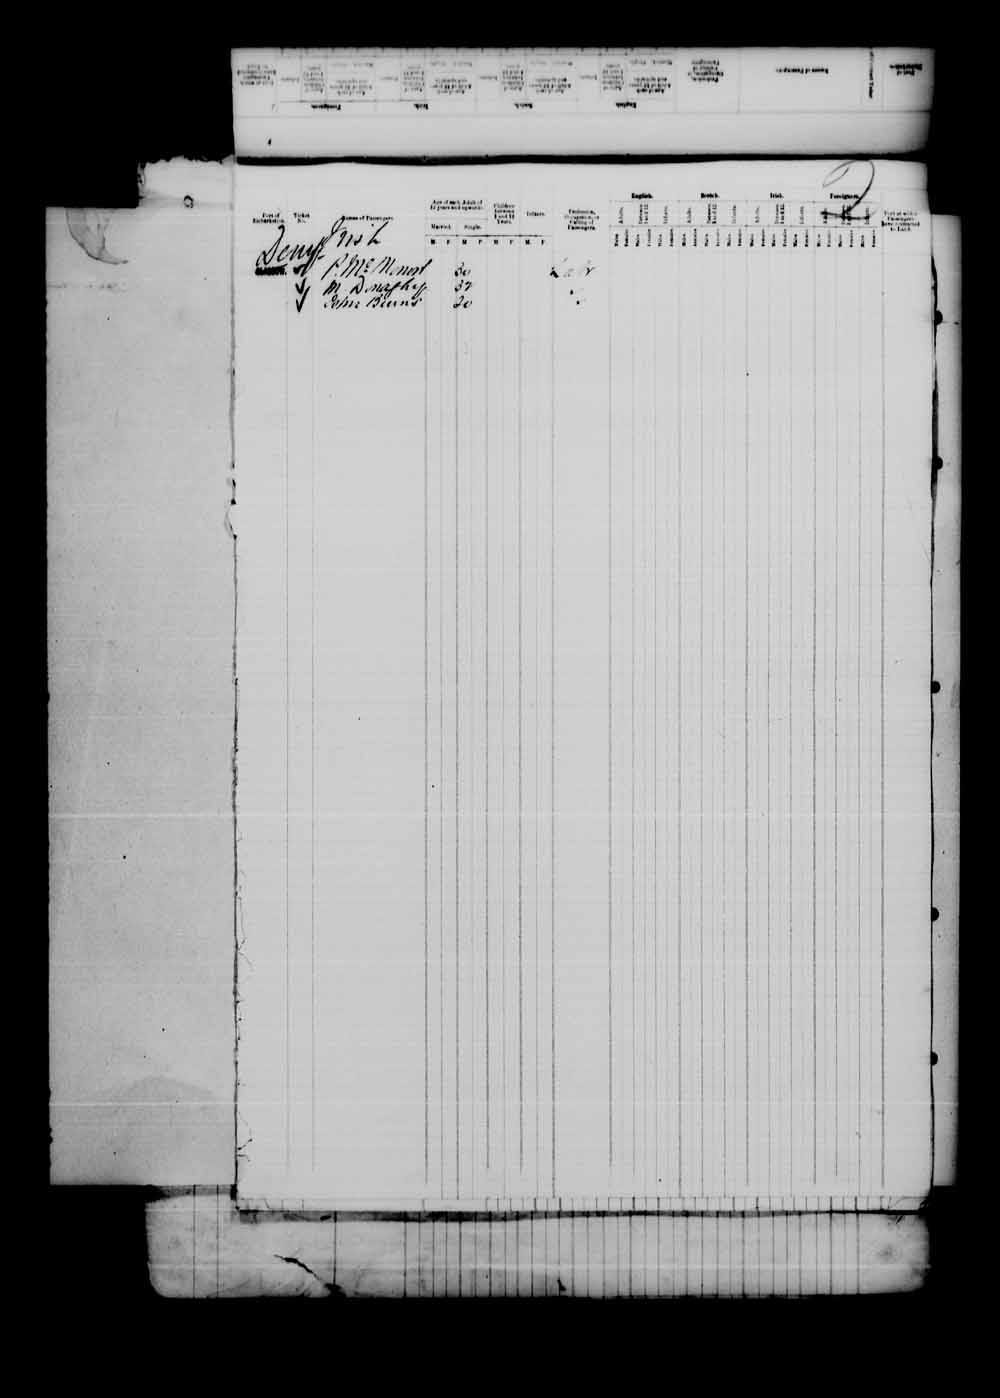 Digitized page of Passenger Lists for Image No.: e003542672